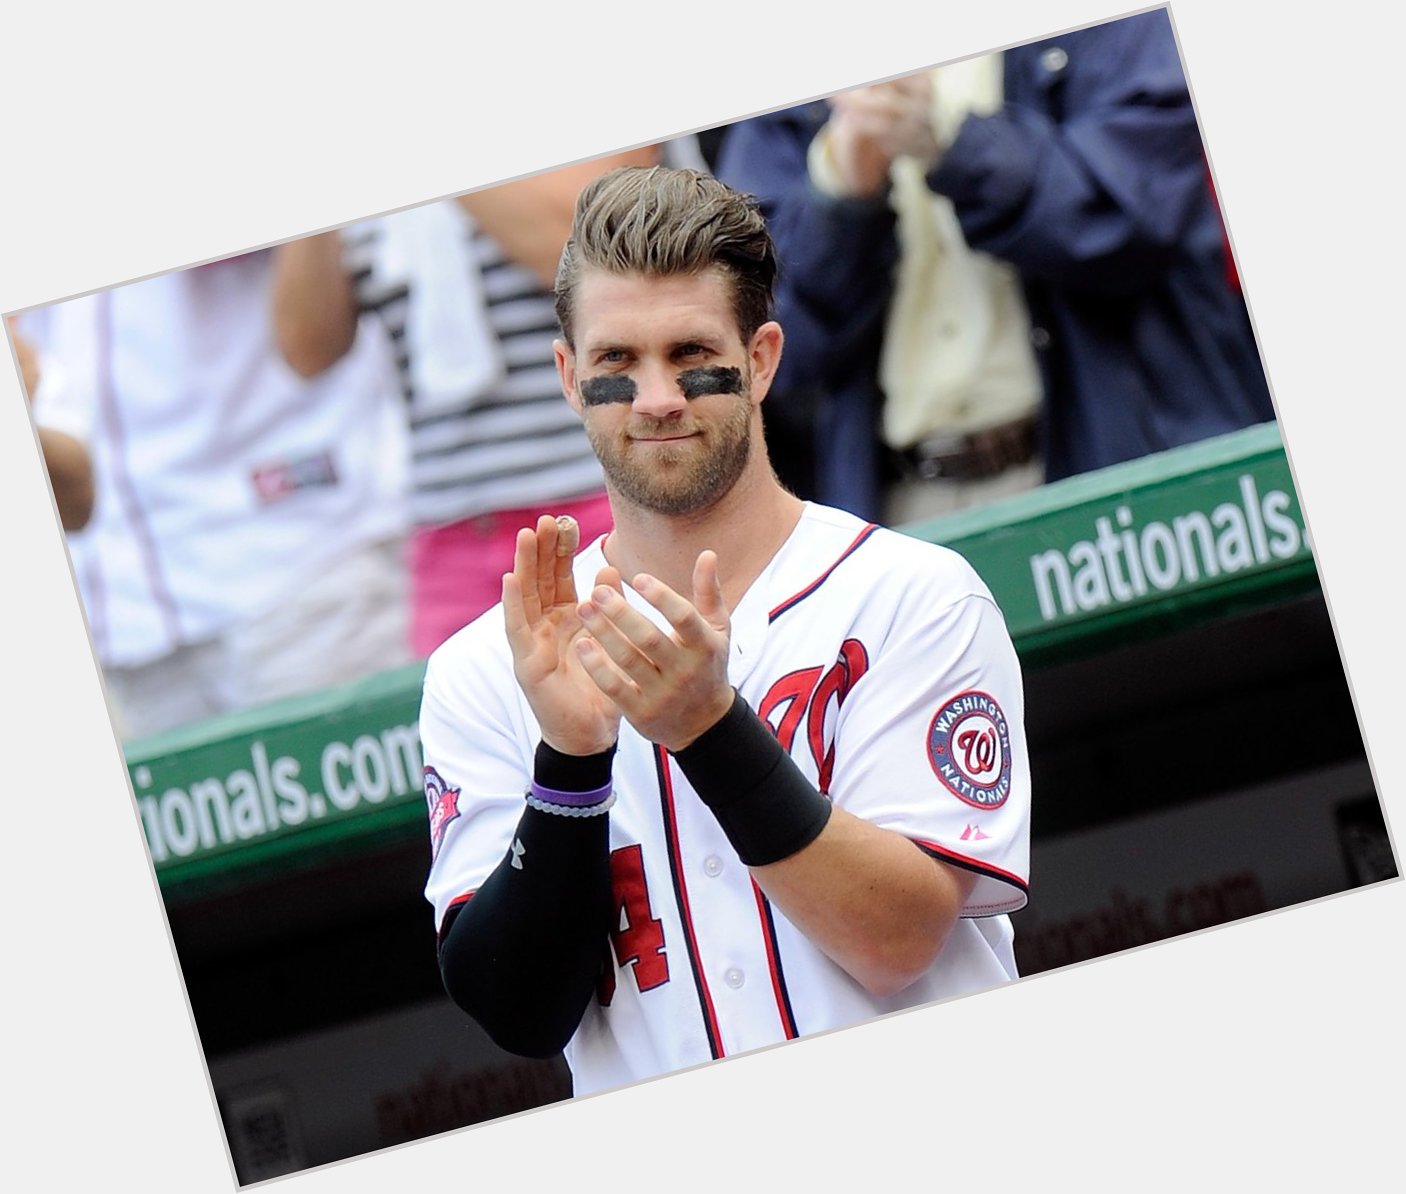 Happy Birthday Bryce Harper. You ve been my favorite players since 2010 when you got drafted 1st overall pick. 